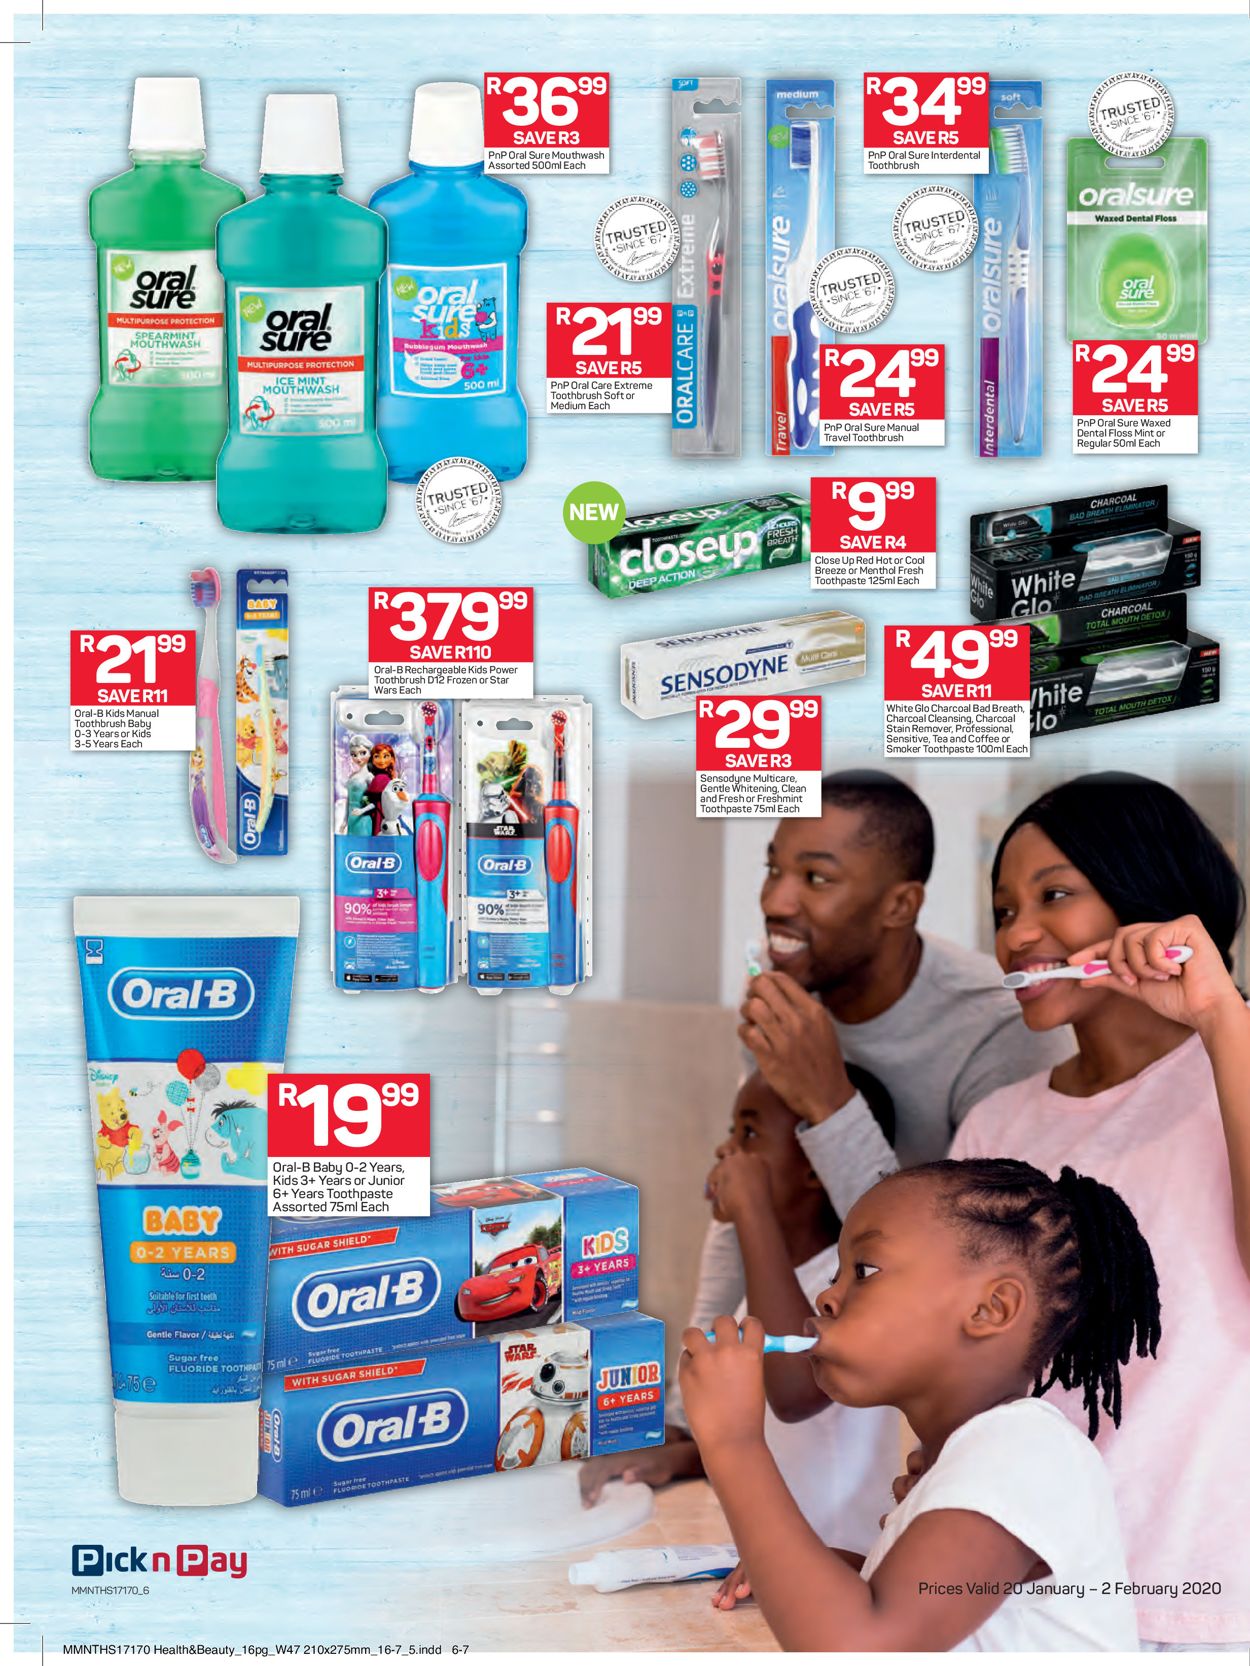 Pick n Pay Catalogue - 2020/01/20-2020/02/02 (Page 7)